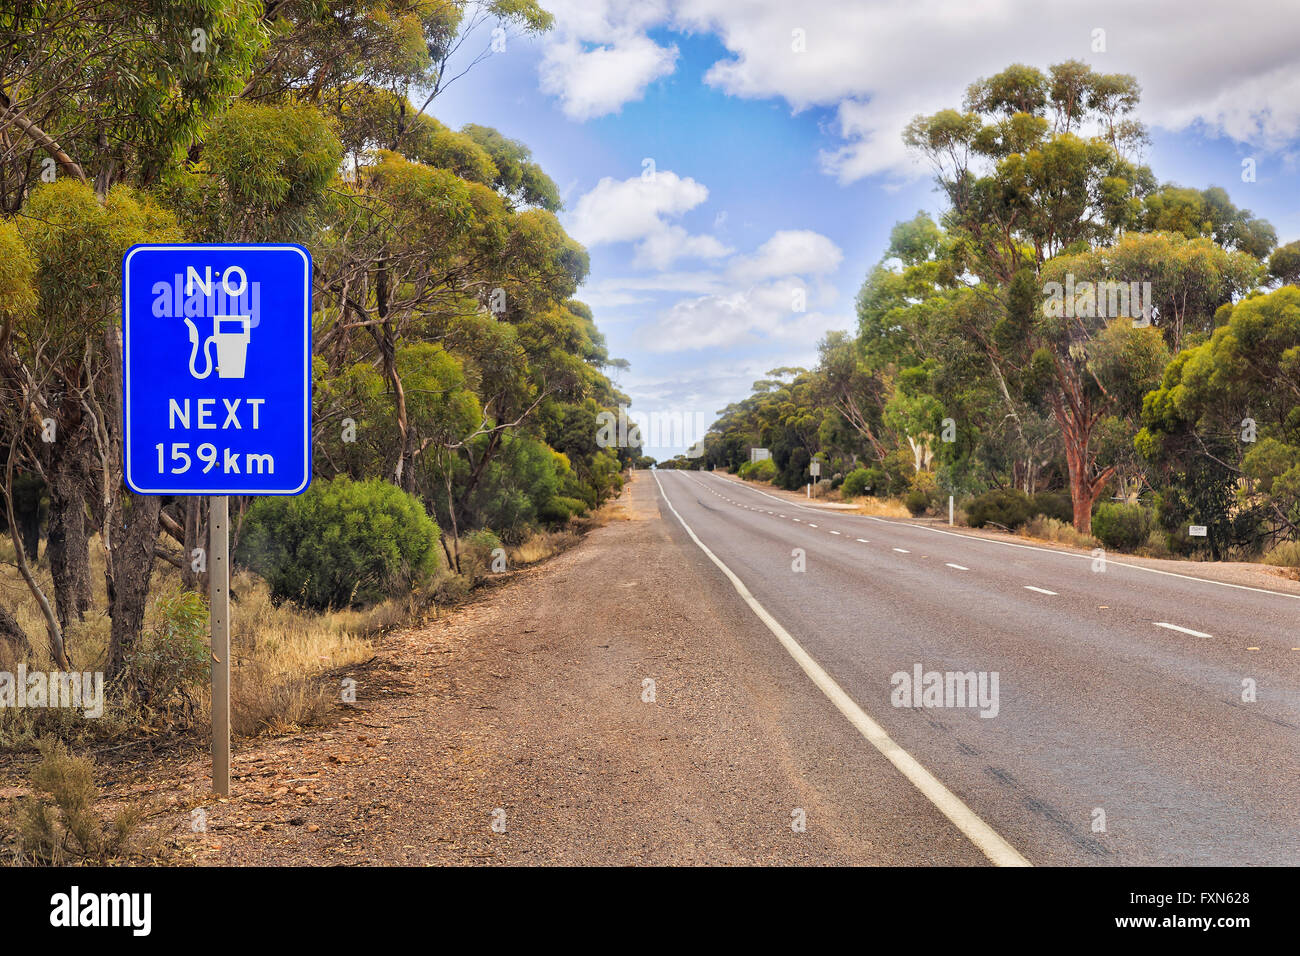 No fuel sign along Eyre Highway in South Australia. Natural eucalyptus woods without developed infrastructure and motoring Stock Photo